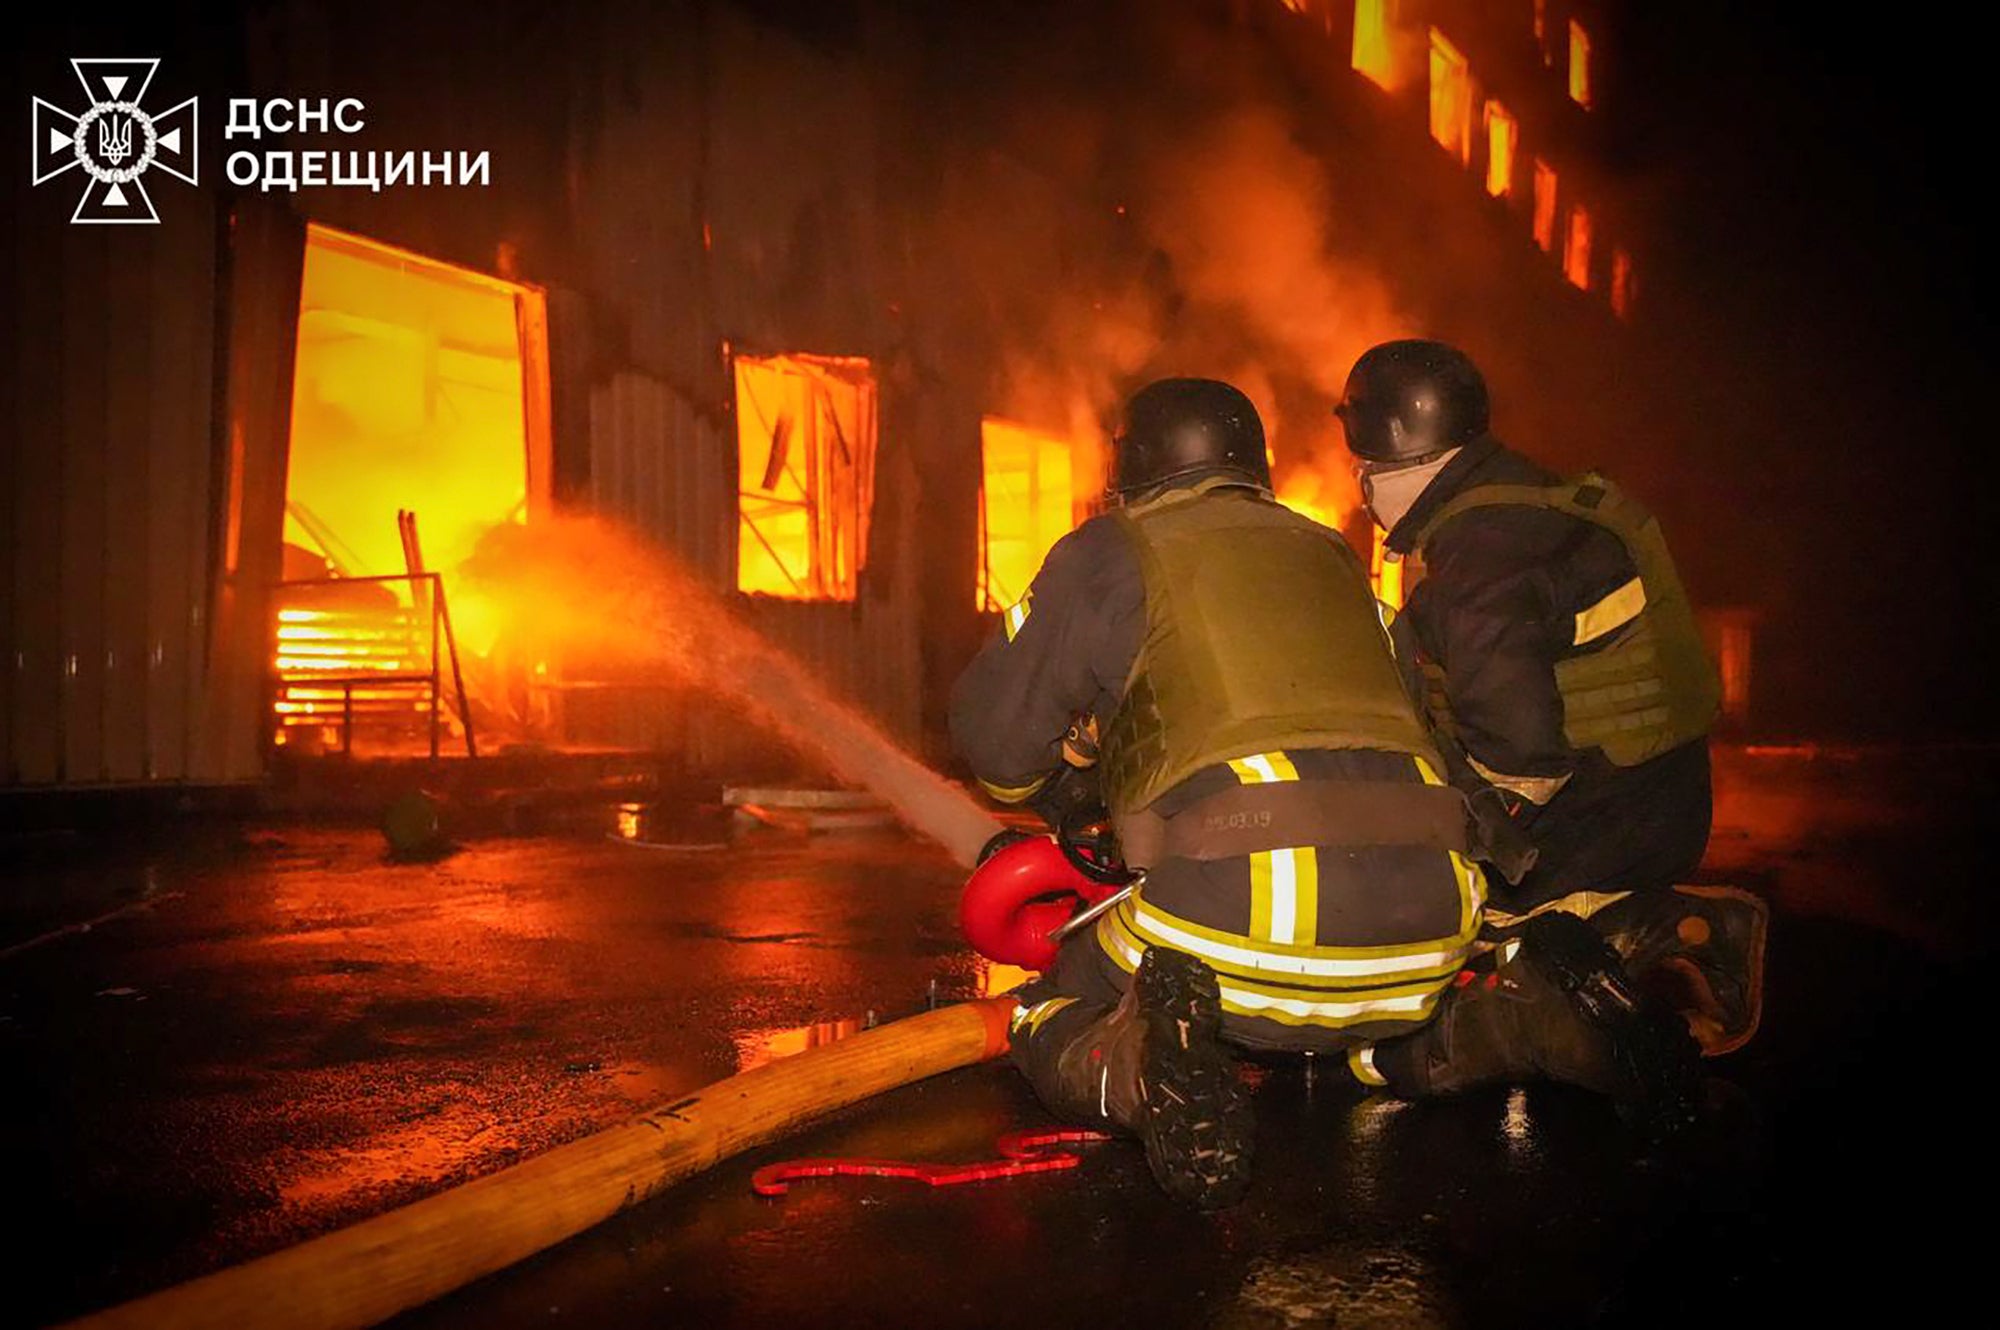 ukraine-russia war latest: us accuses putin of using chemical weapons as missile causes large fire in odesa